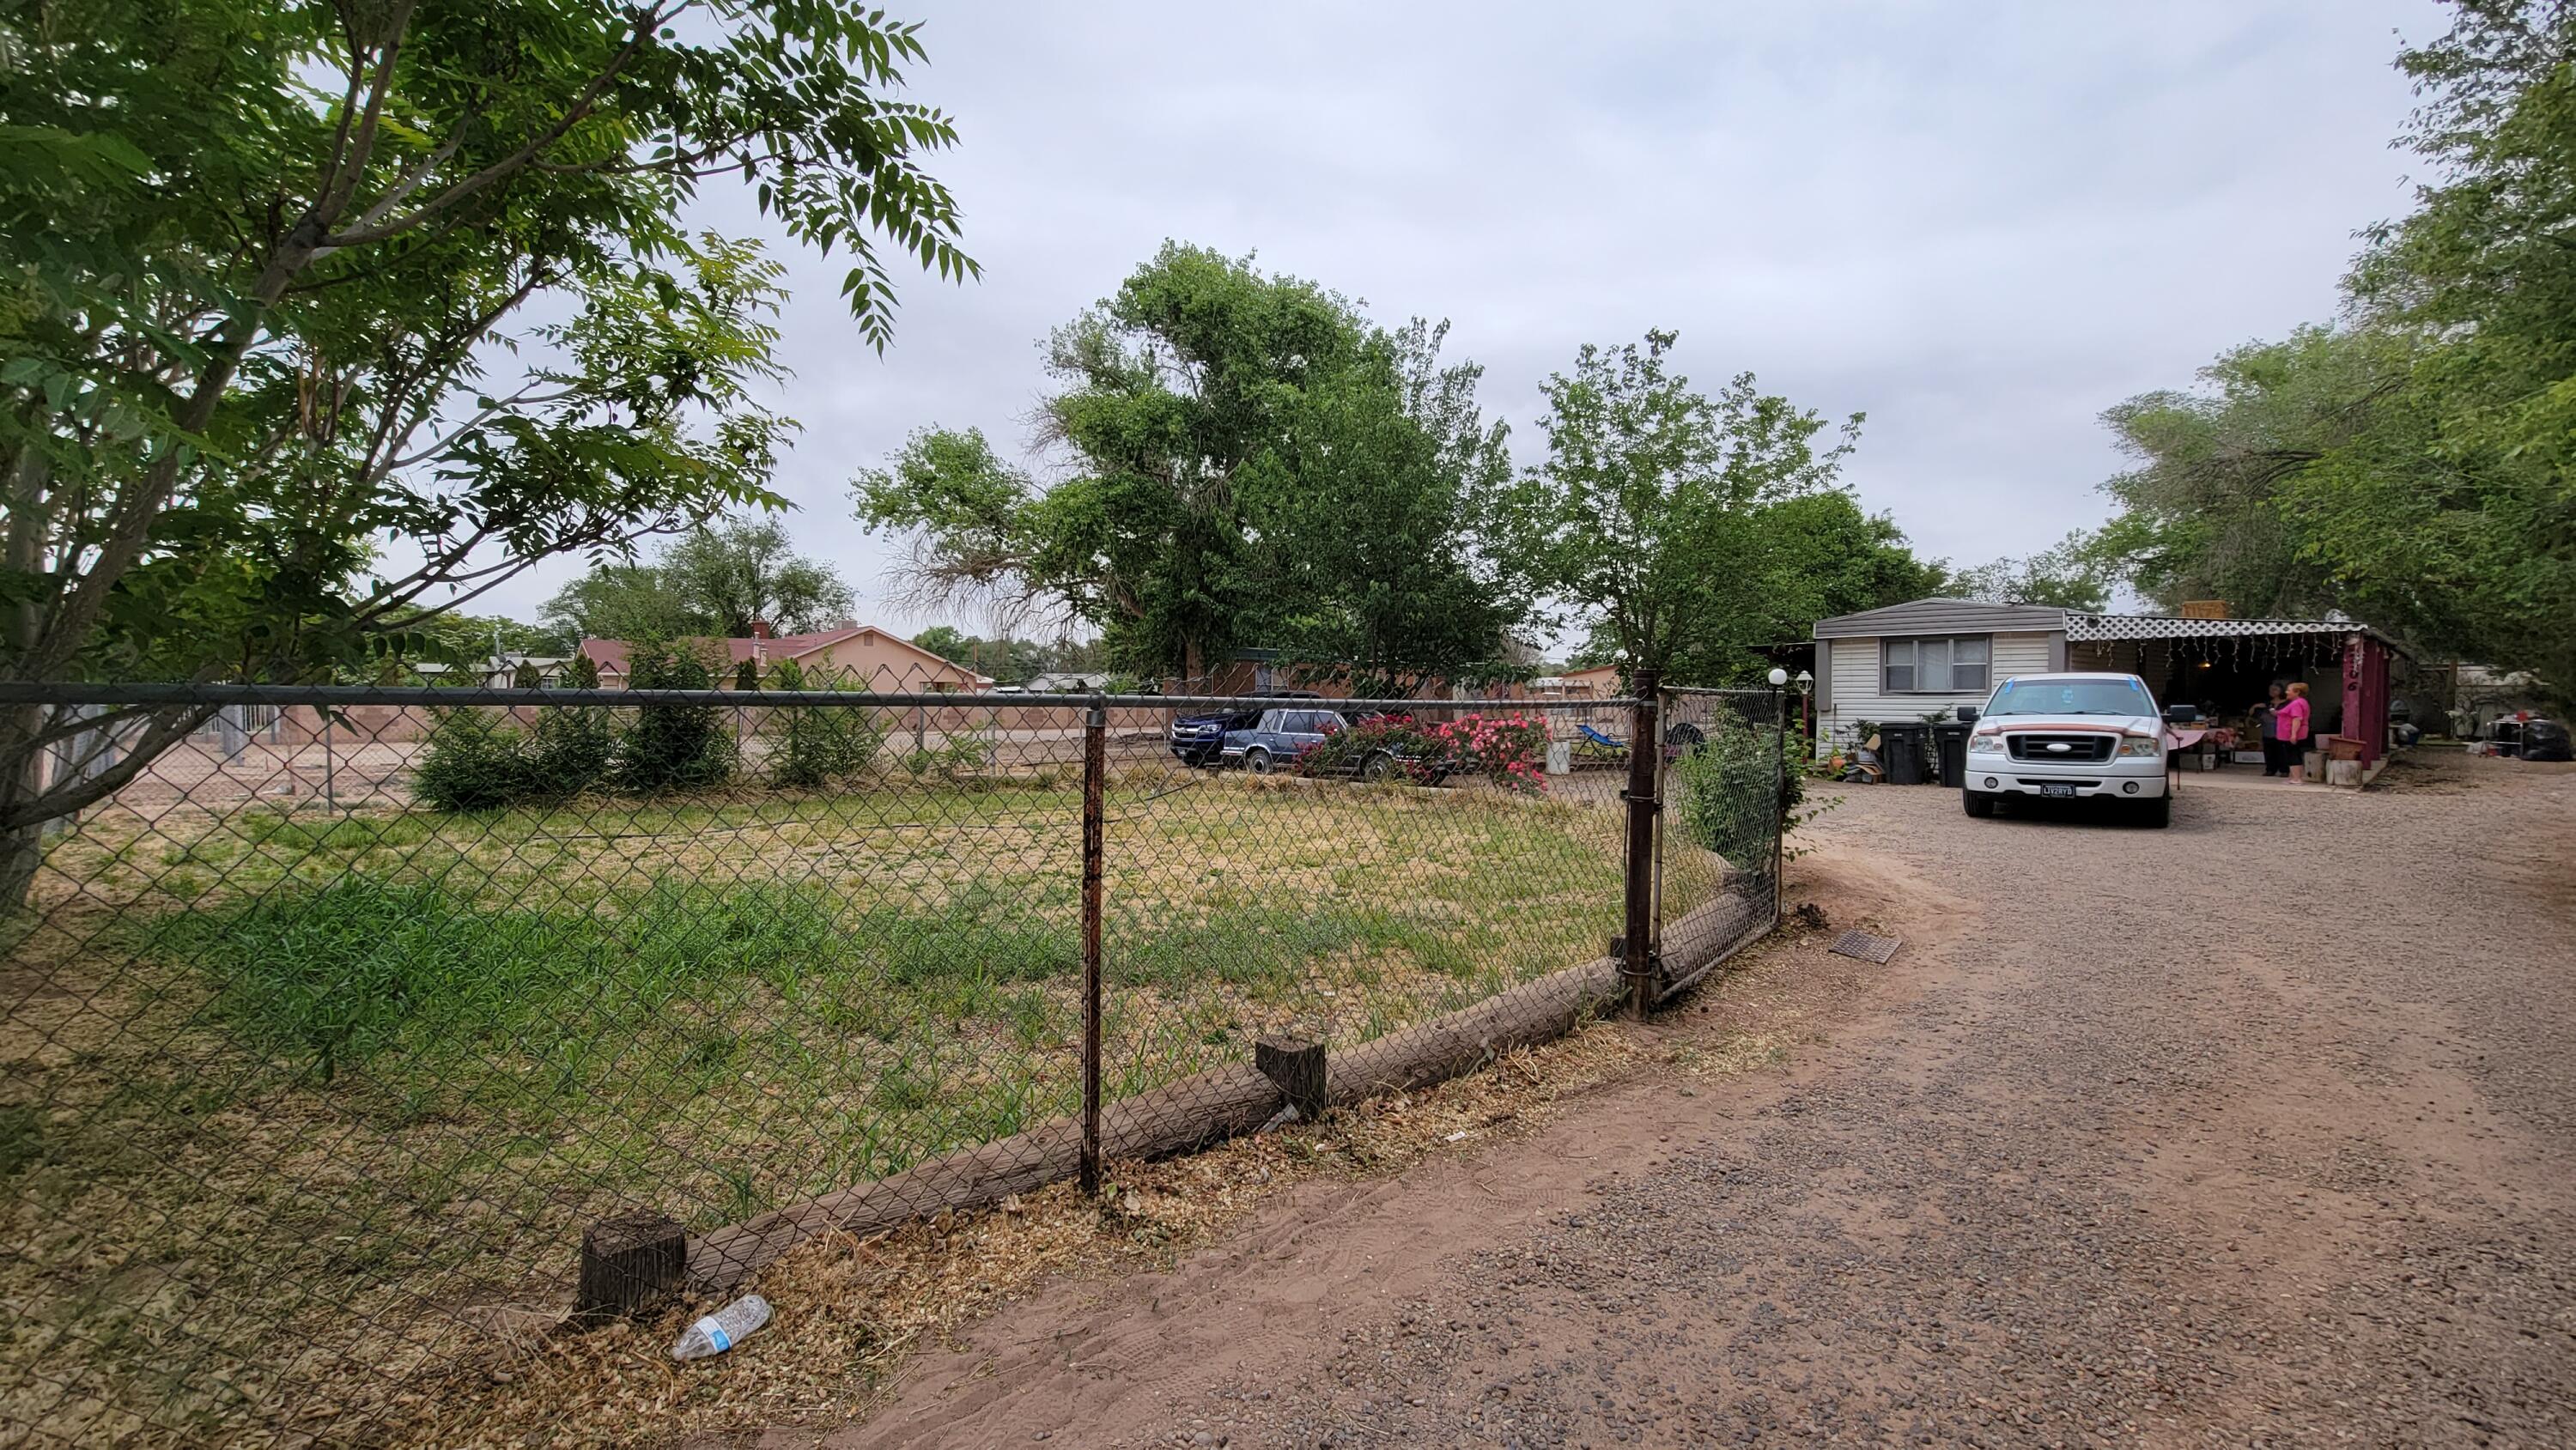 Come see this well maintained 3 bedroom 1 3/4 bath mobile home on .51 acres with an irrigation well, a carport, 2 storage sheds, a wheel chair accessible ramp and a covered patio!  This one owner home has a newly remodeled bathroom and comes with all appliances including refrigerator, washer and dryer and all the land you need near the city!